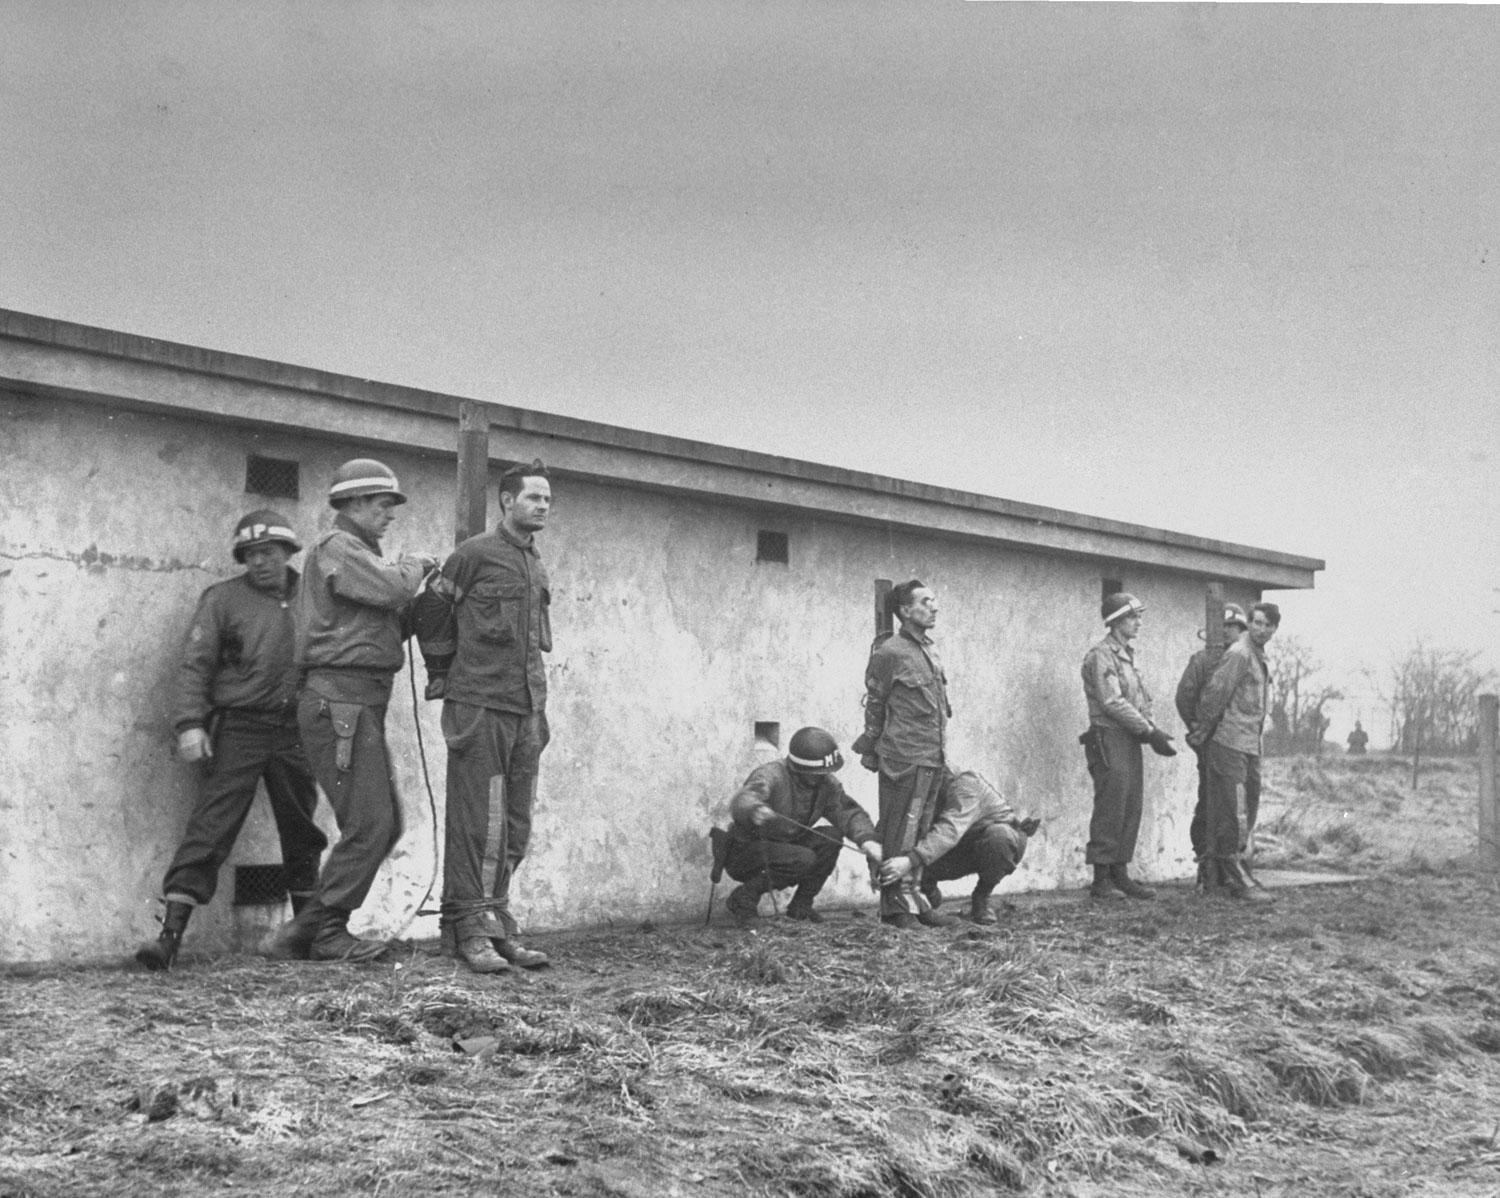 Photographed on Dec. 23, 1944, but not published in LIFE until June 1945. Behind a cell block, German prisoners are bound to stakes by MPs. Tried and convicted as spies, they are about to be executed.